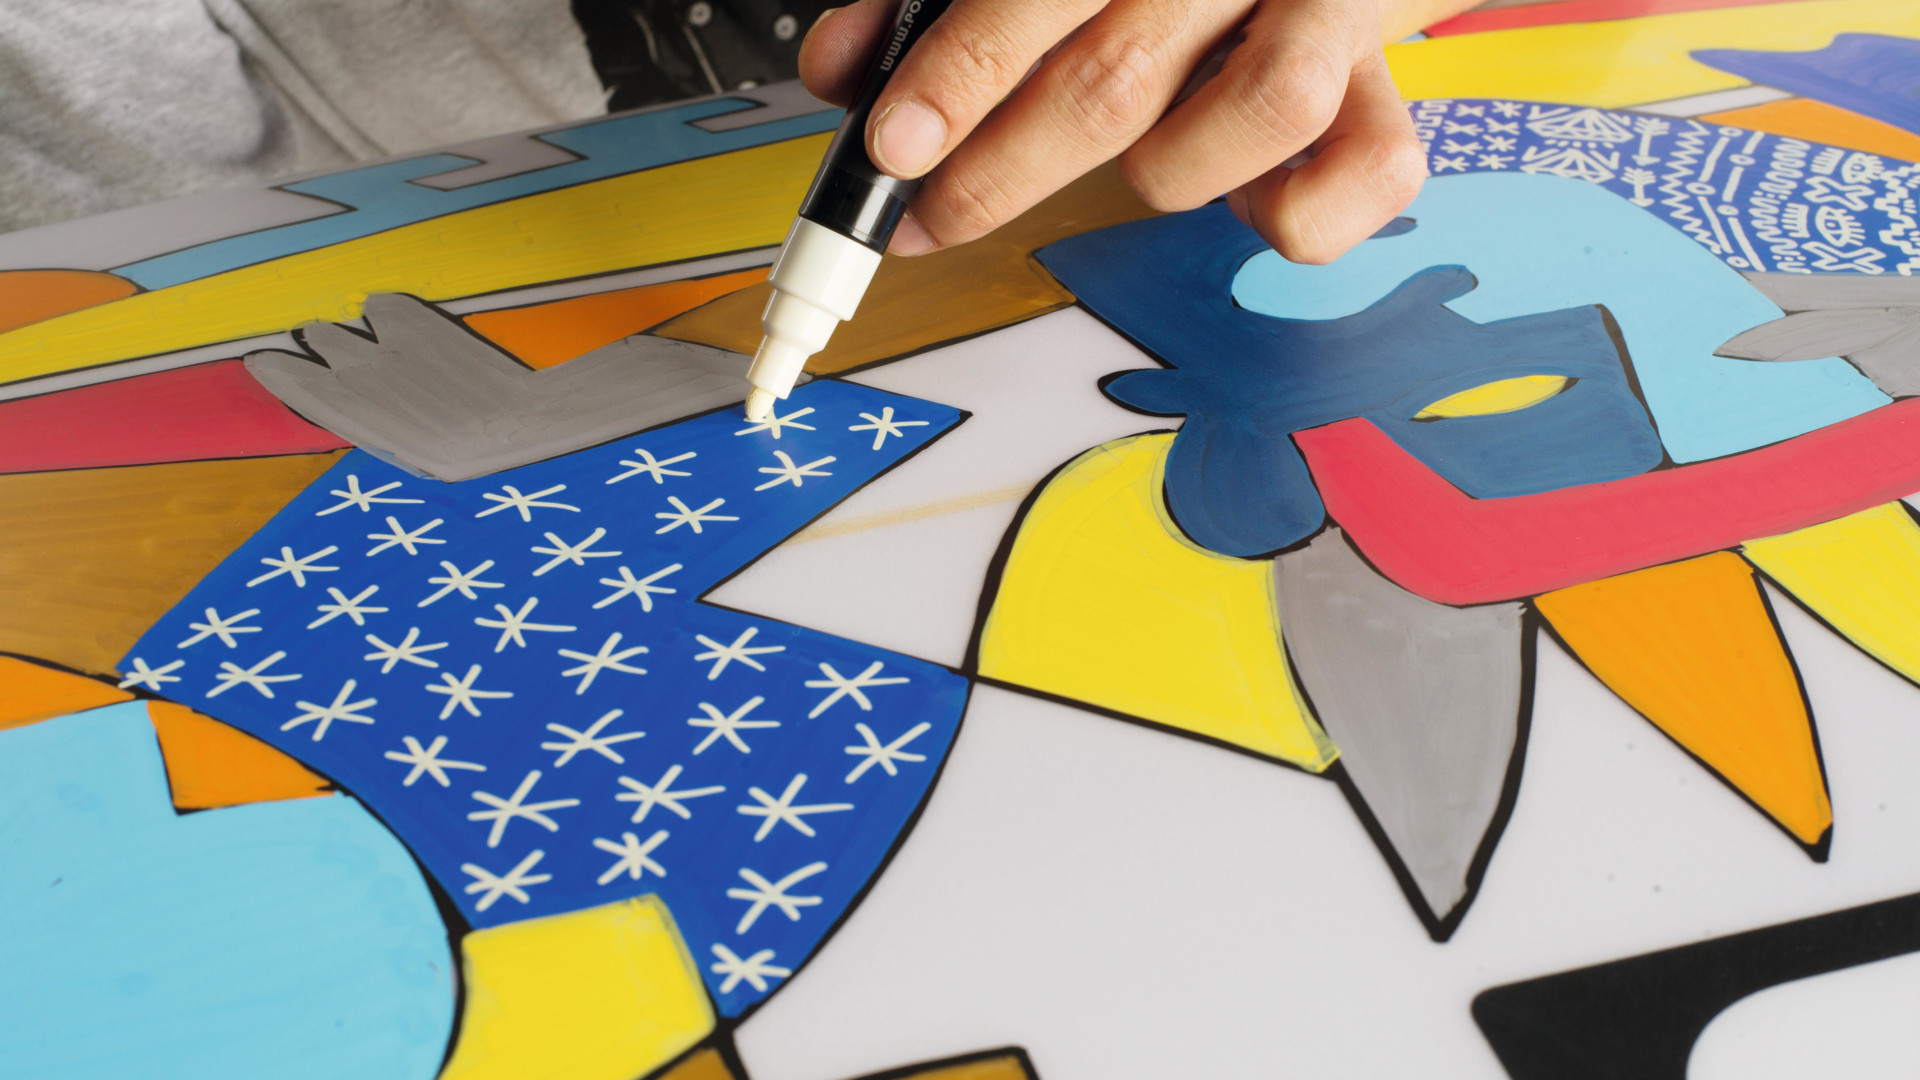 Here is how to color lineless posca art with your posca markers. In th, Posca Markers